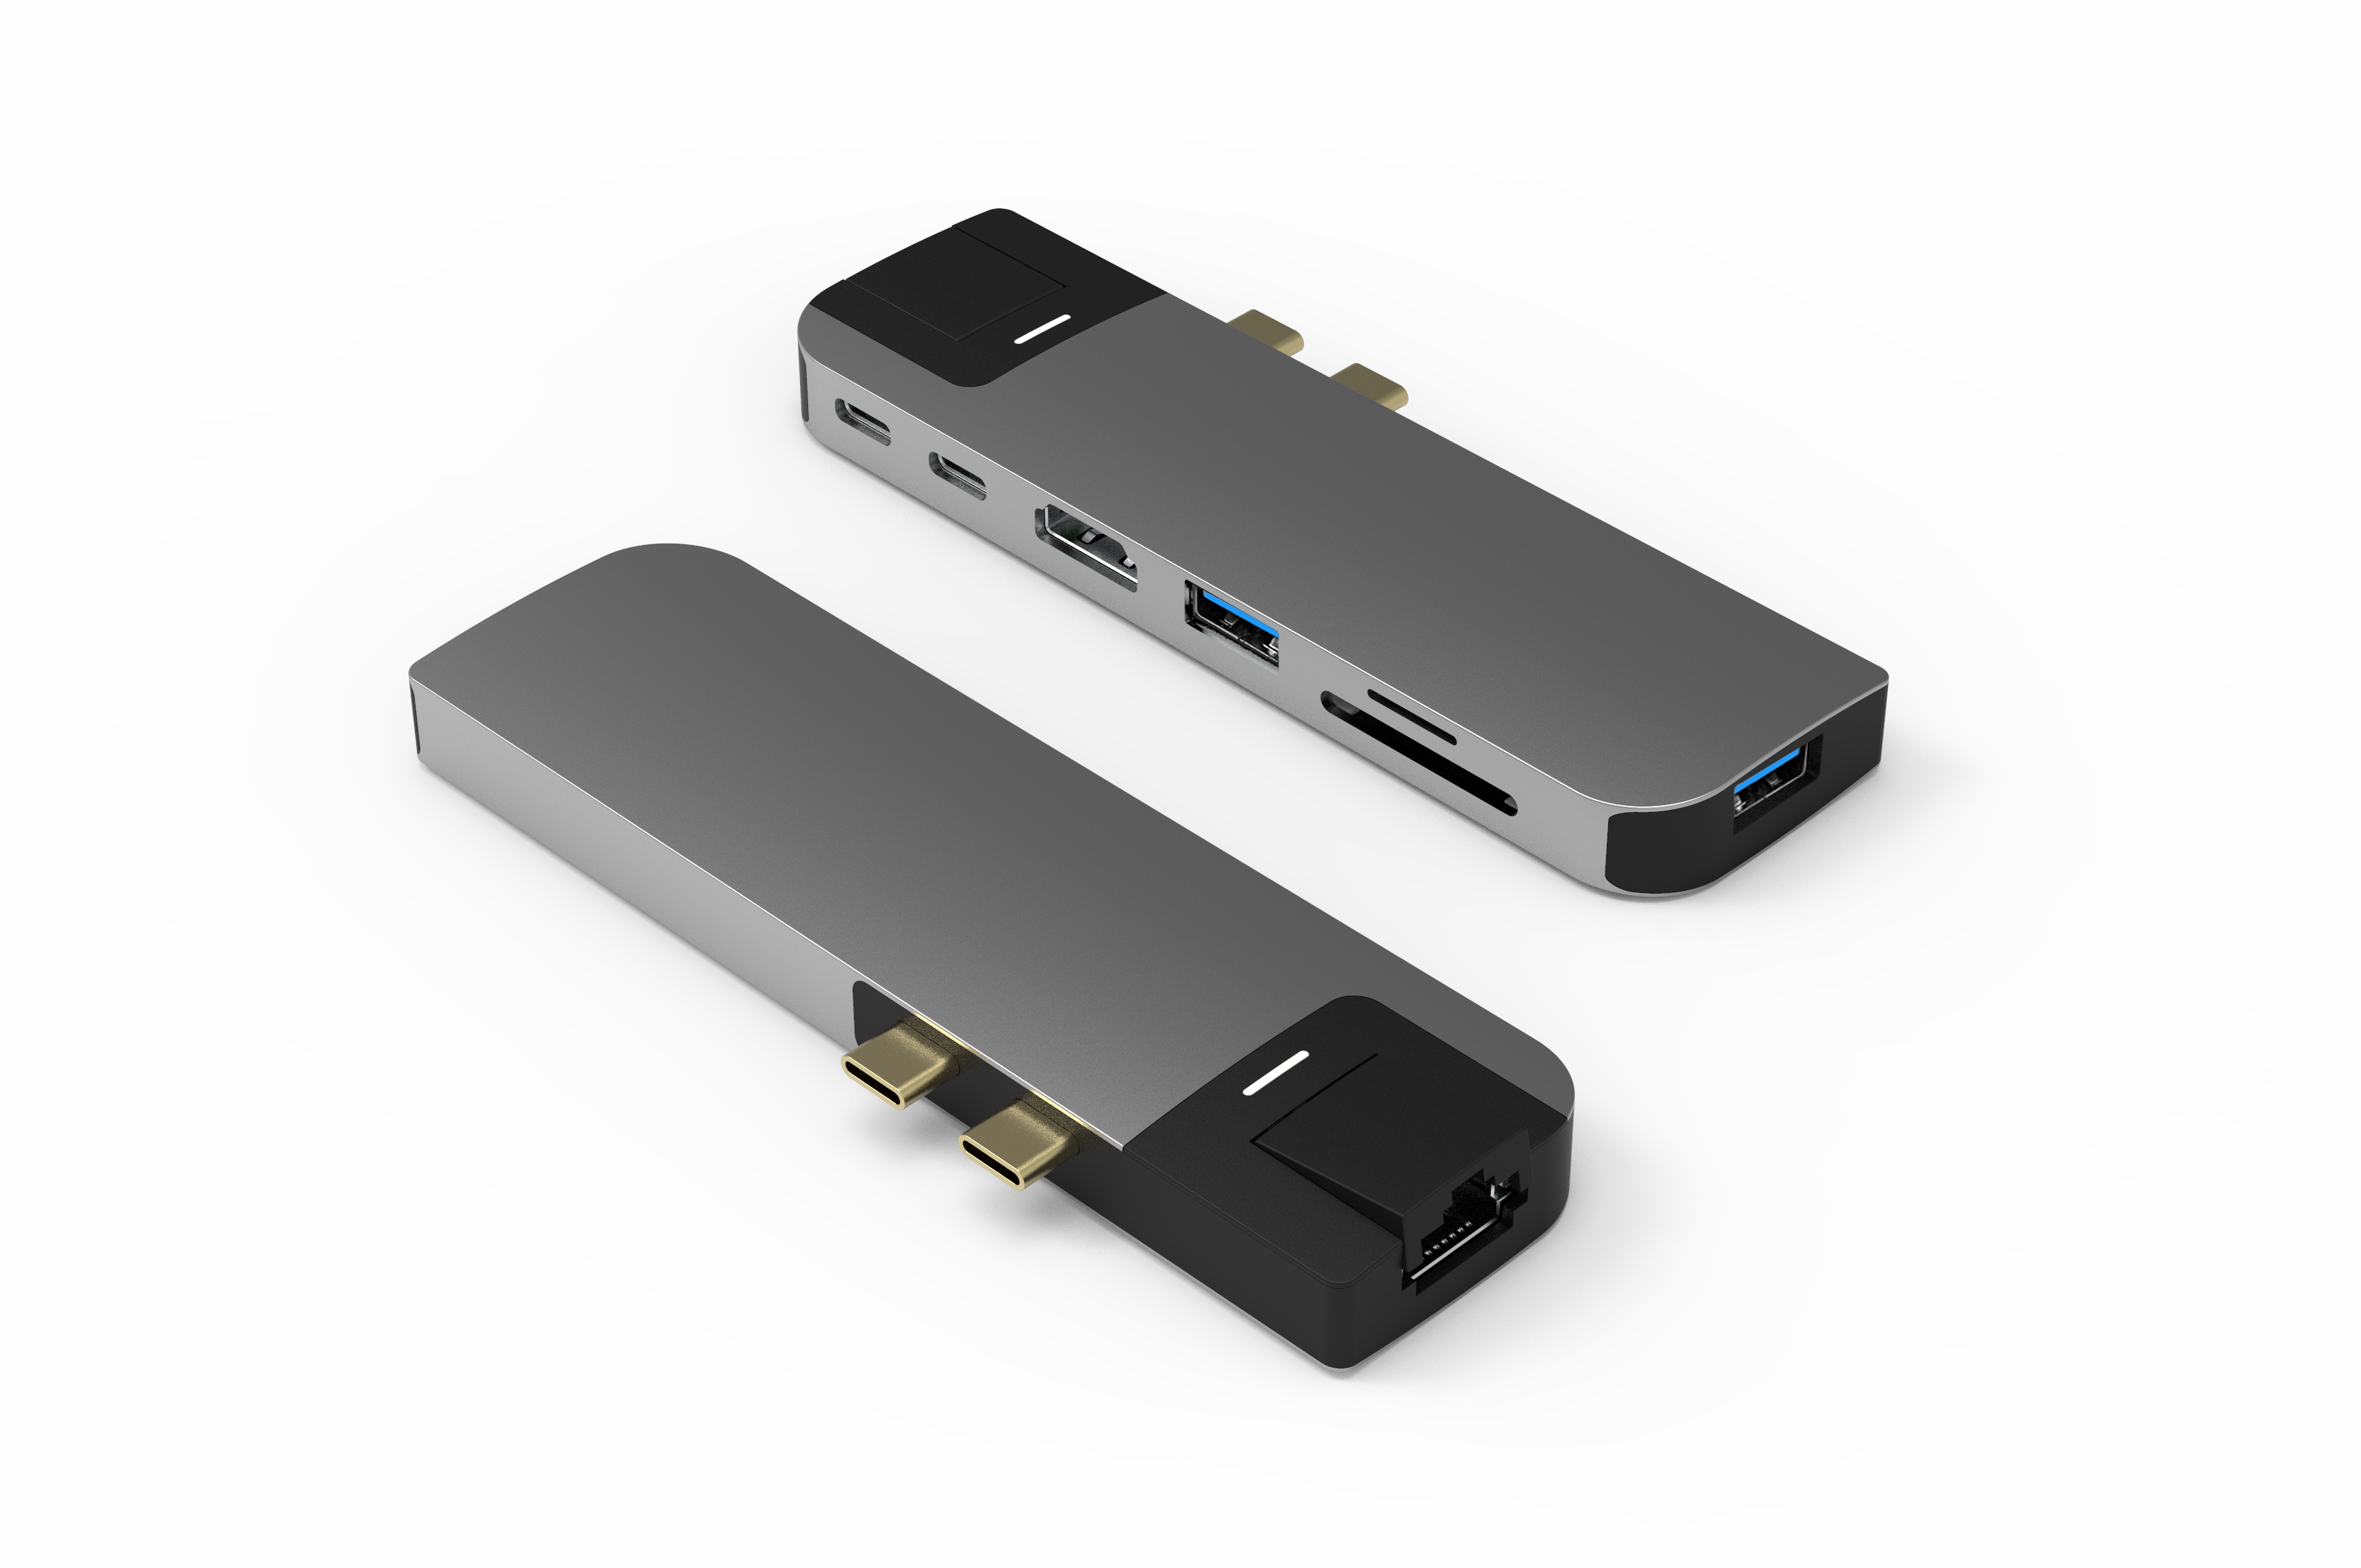  USB C Adapters for MacBook Pro/Air,Mac Dongle with 3